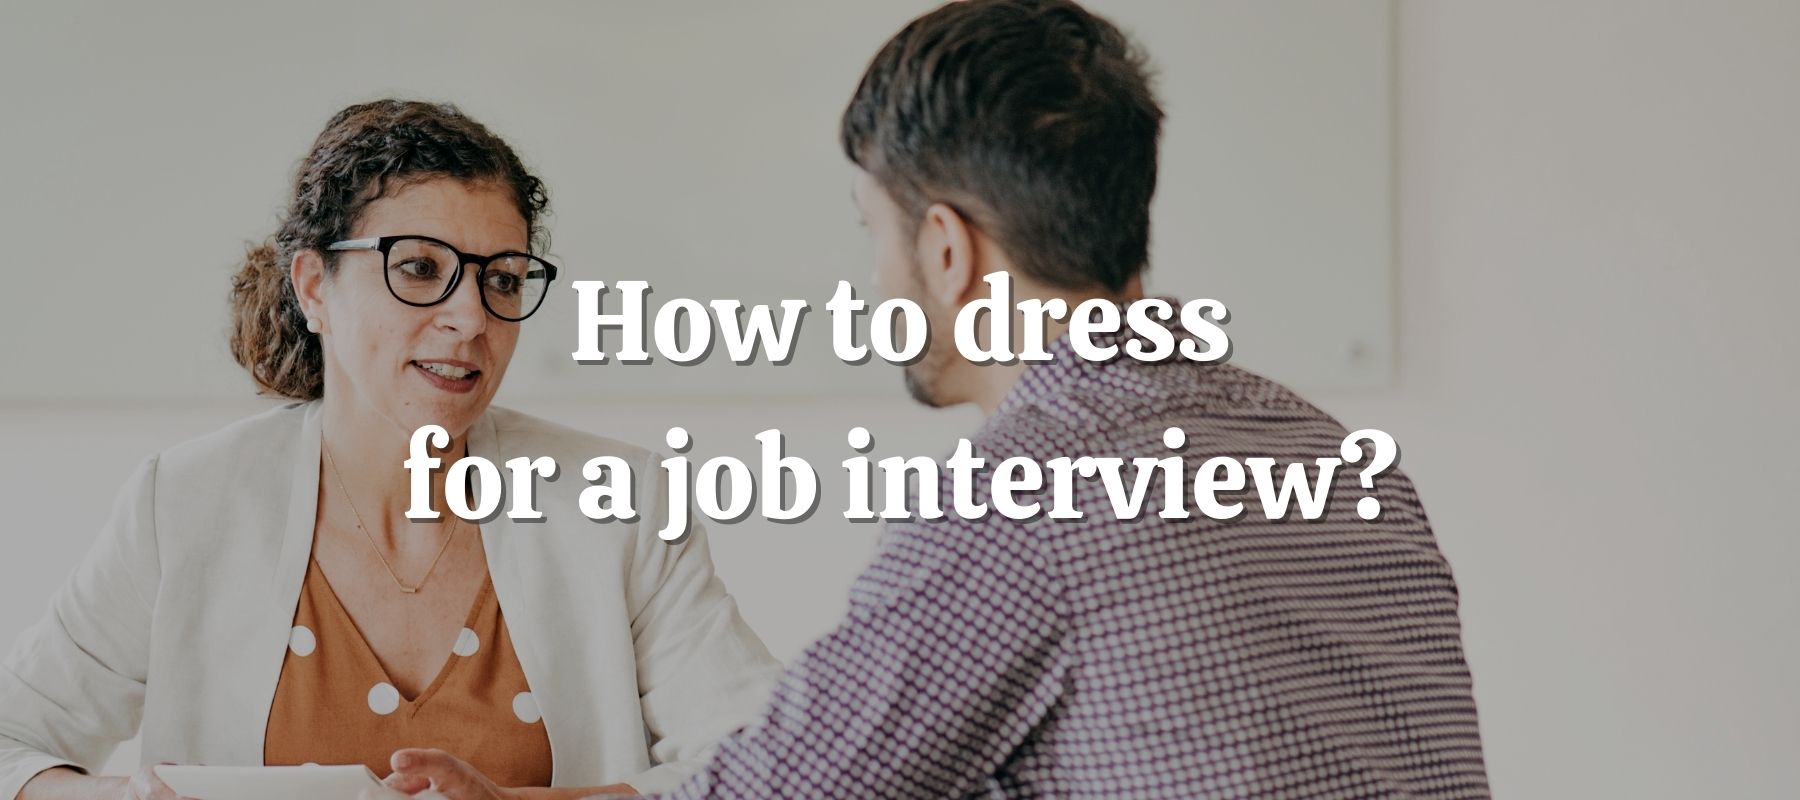 How to dress for a job interview?